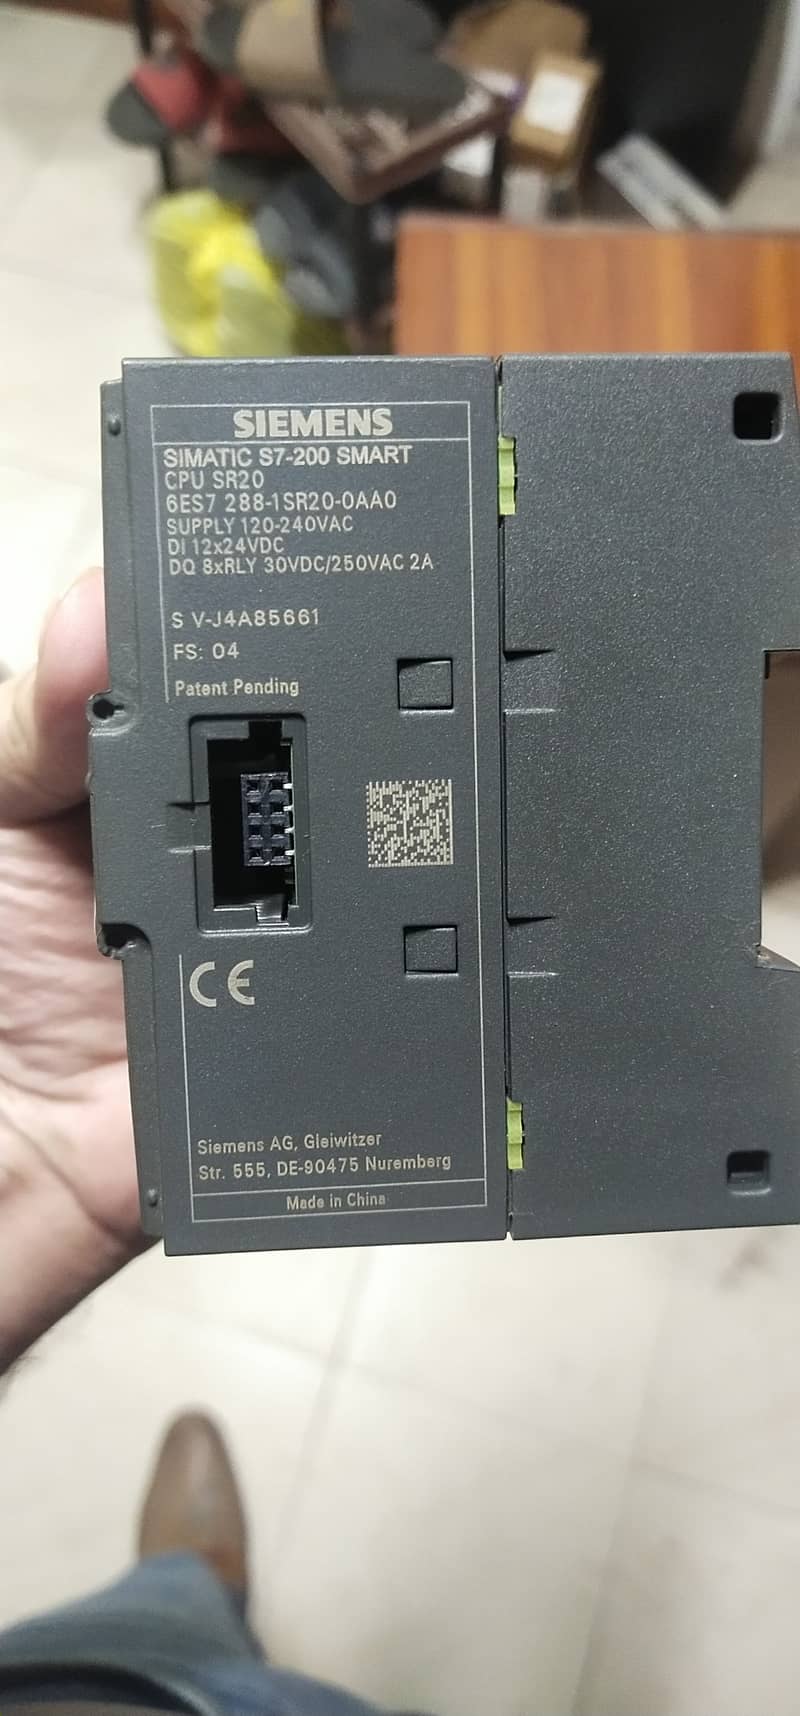 S7 200 smart plc, Analog, Digital I/O, CP cards new & used in stock 13